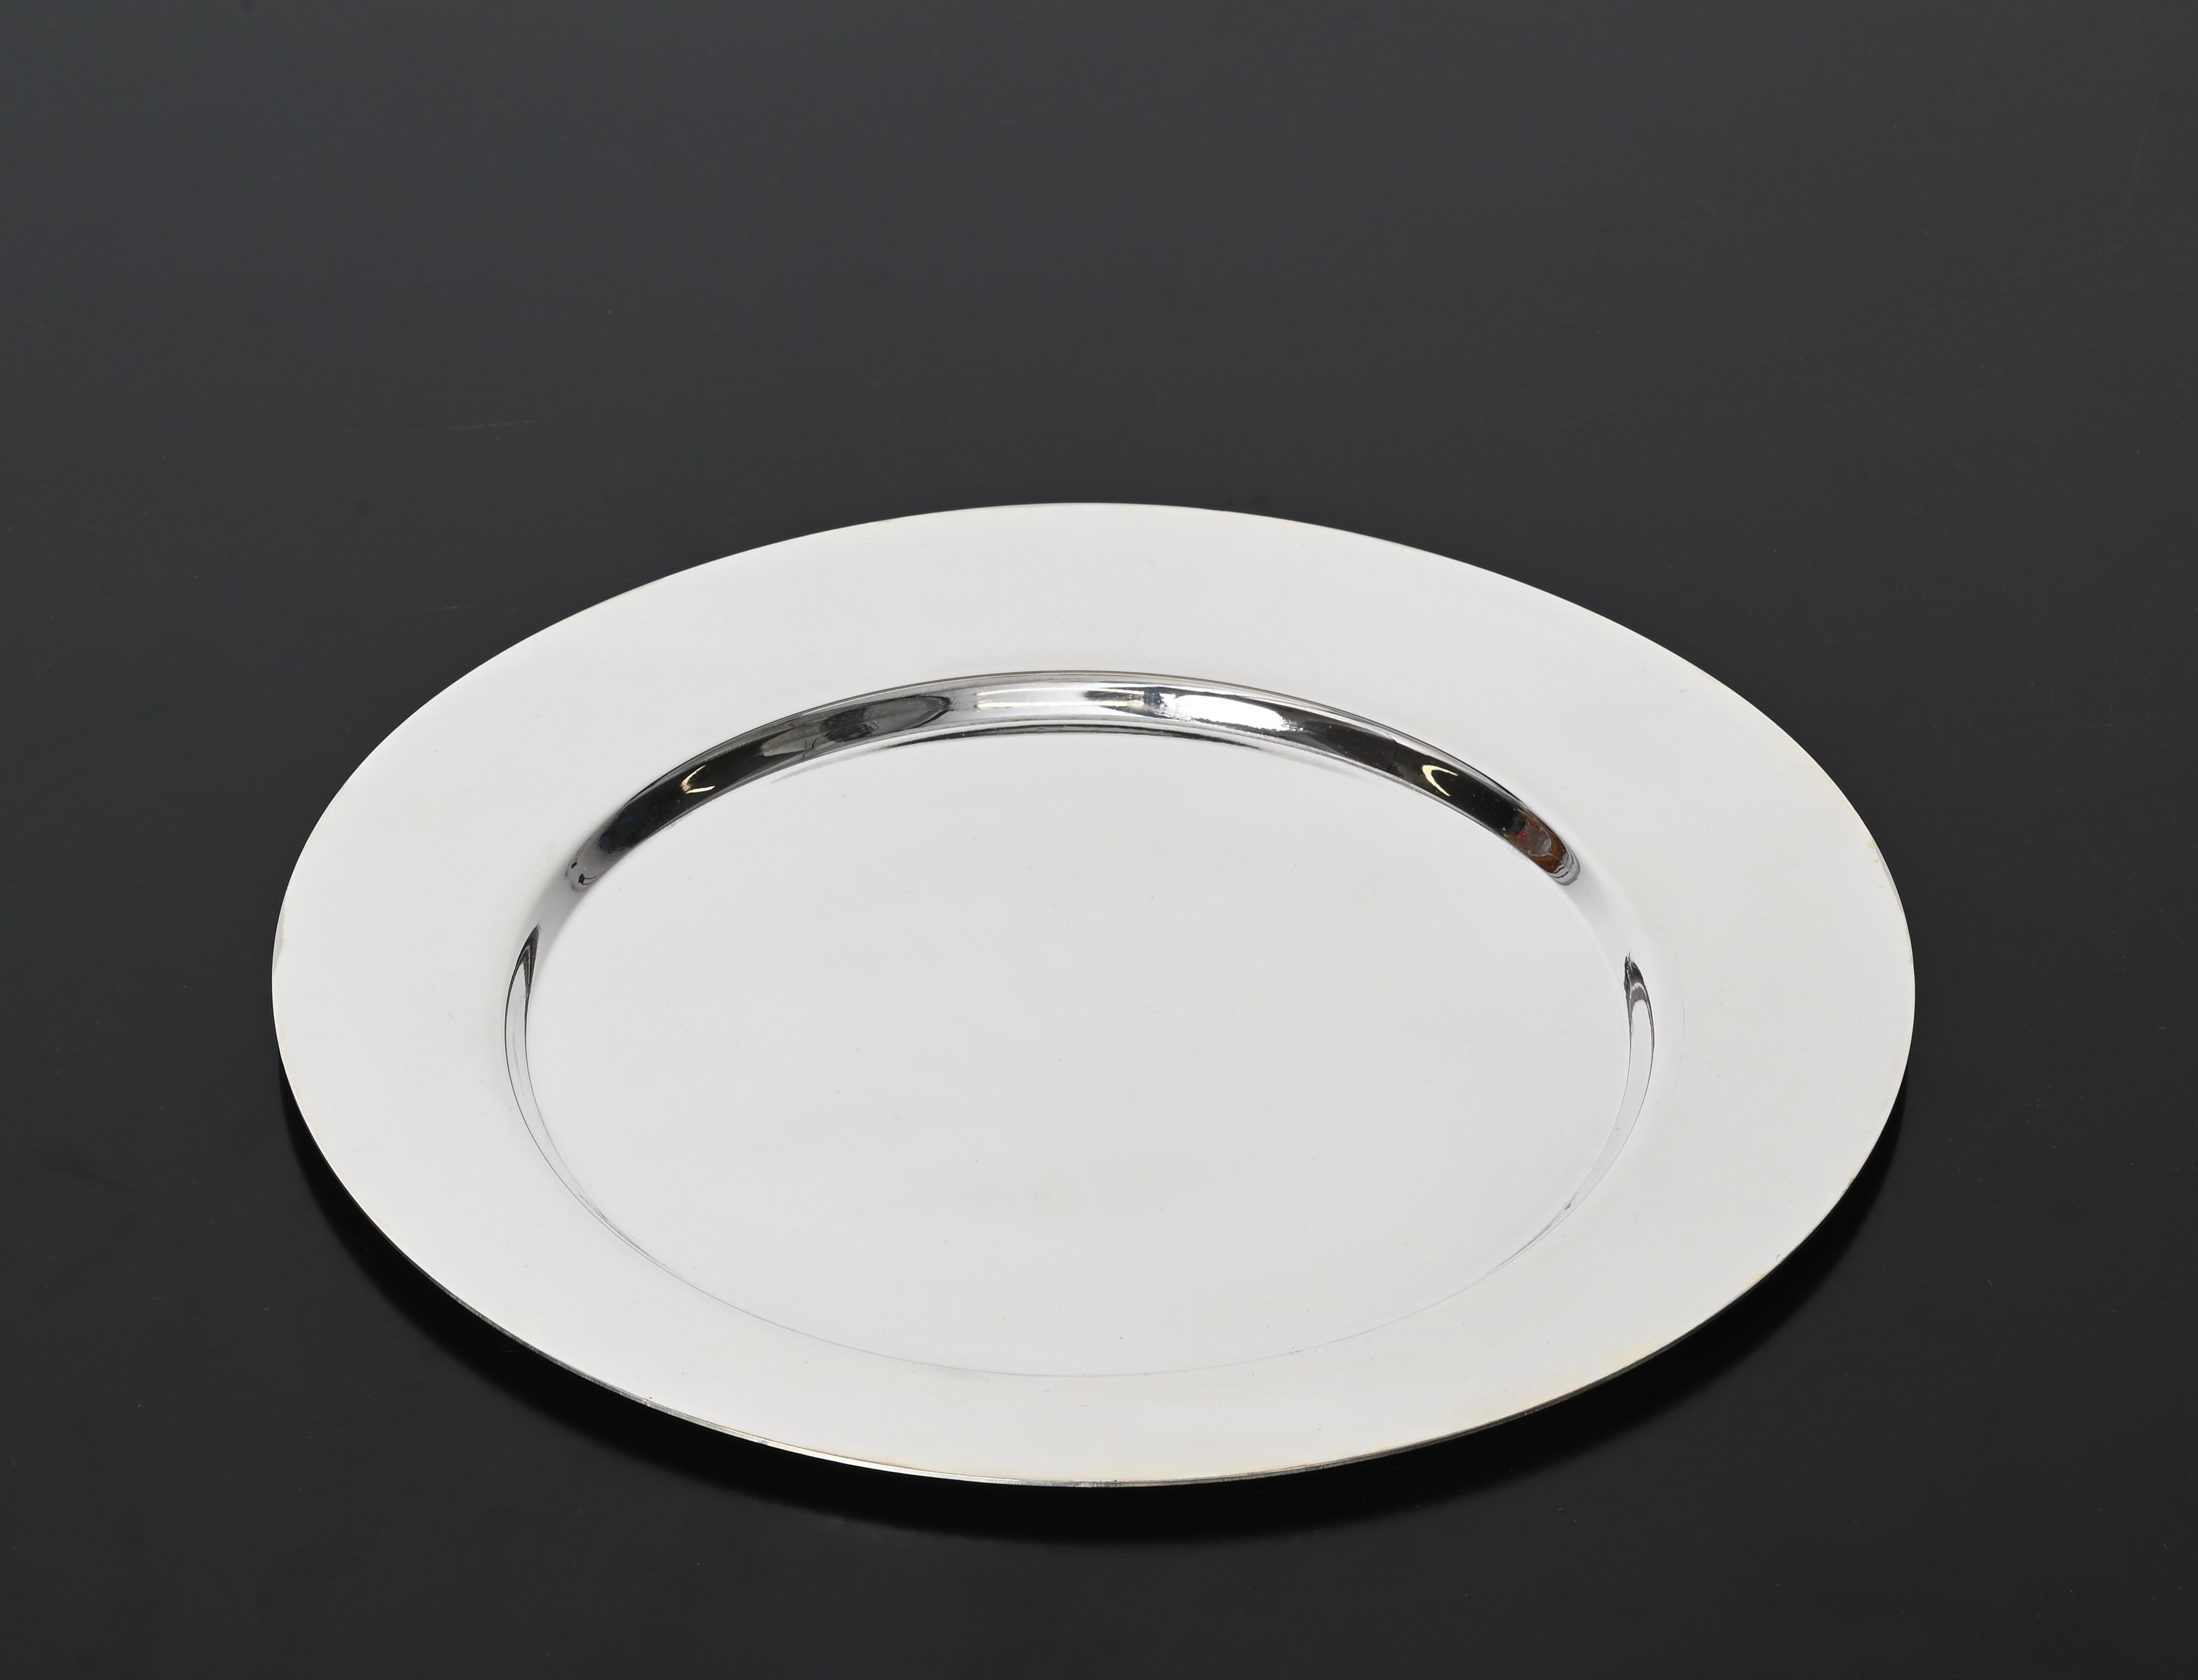 20th Century Gio Ponti for Cleto Munari Modernist Silver Plated Serving Plate Italy, 1980s For Sale